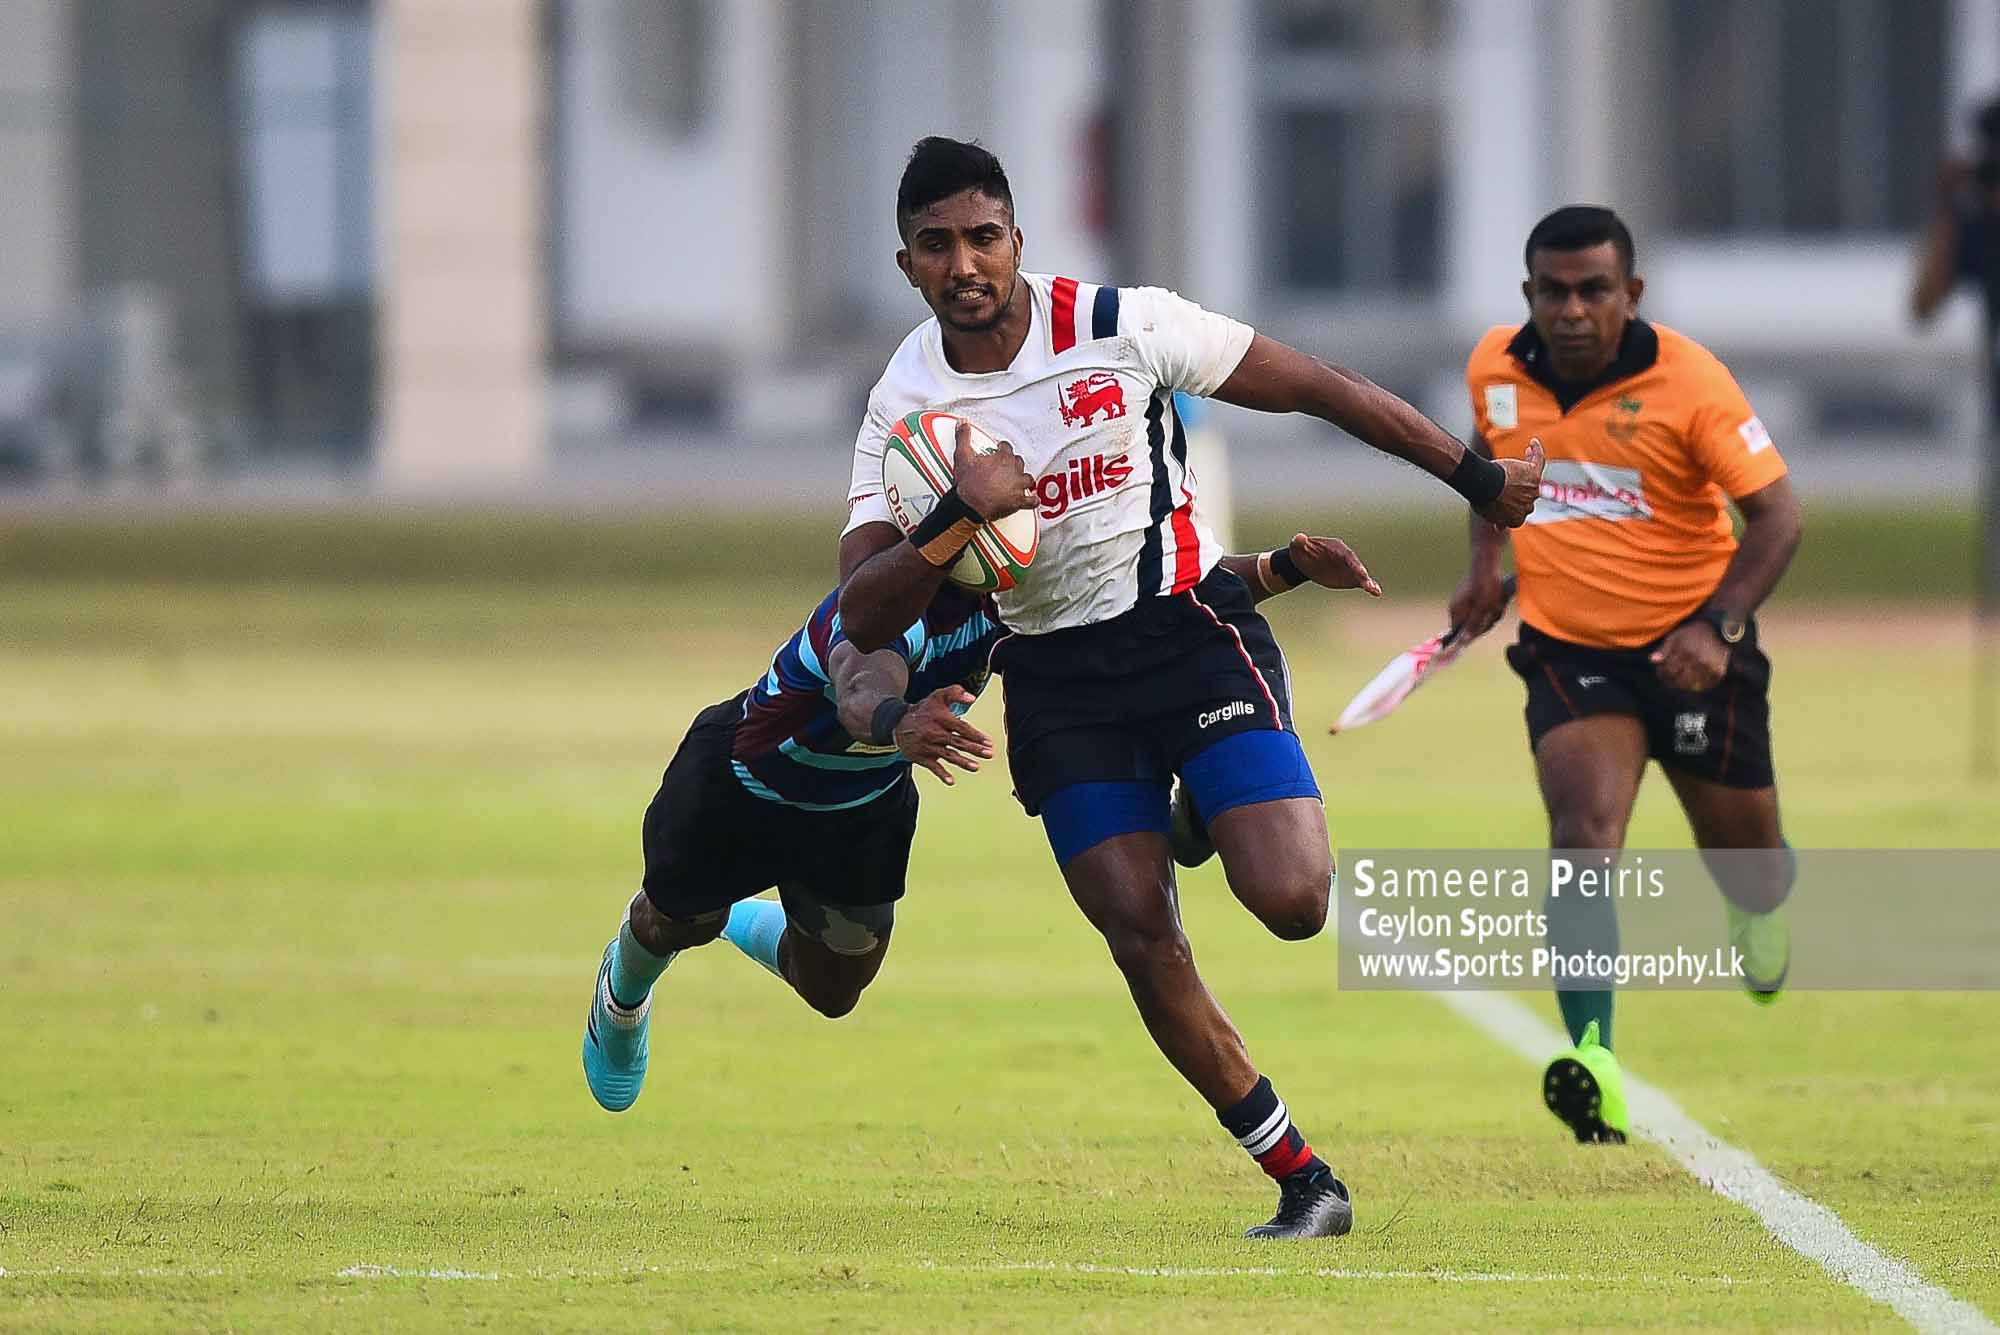 Kandy Vs Air Force – Rugby League 2022